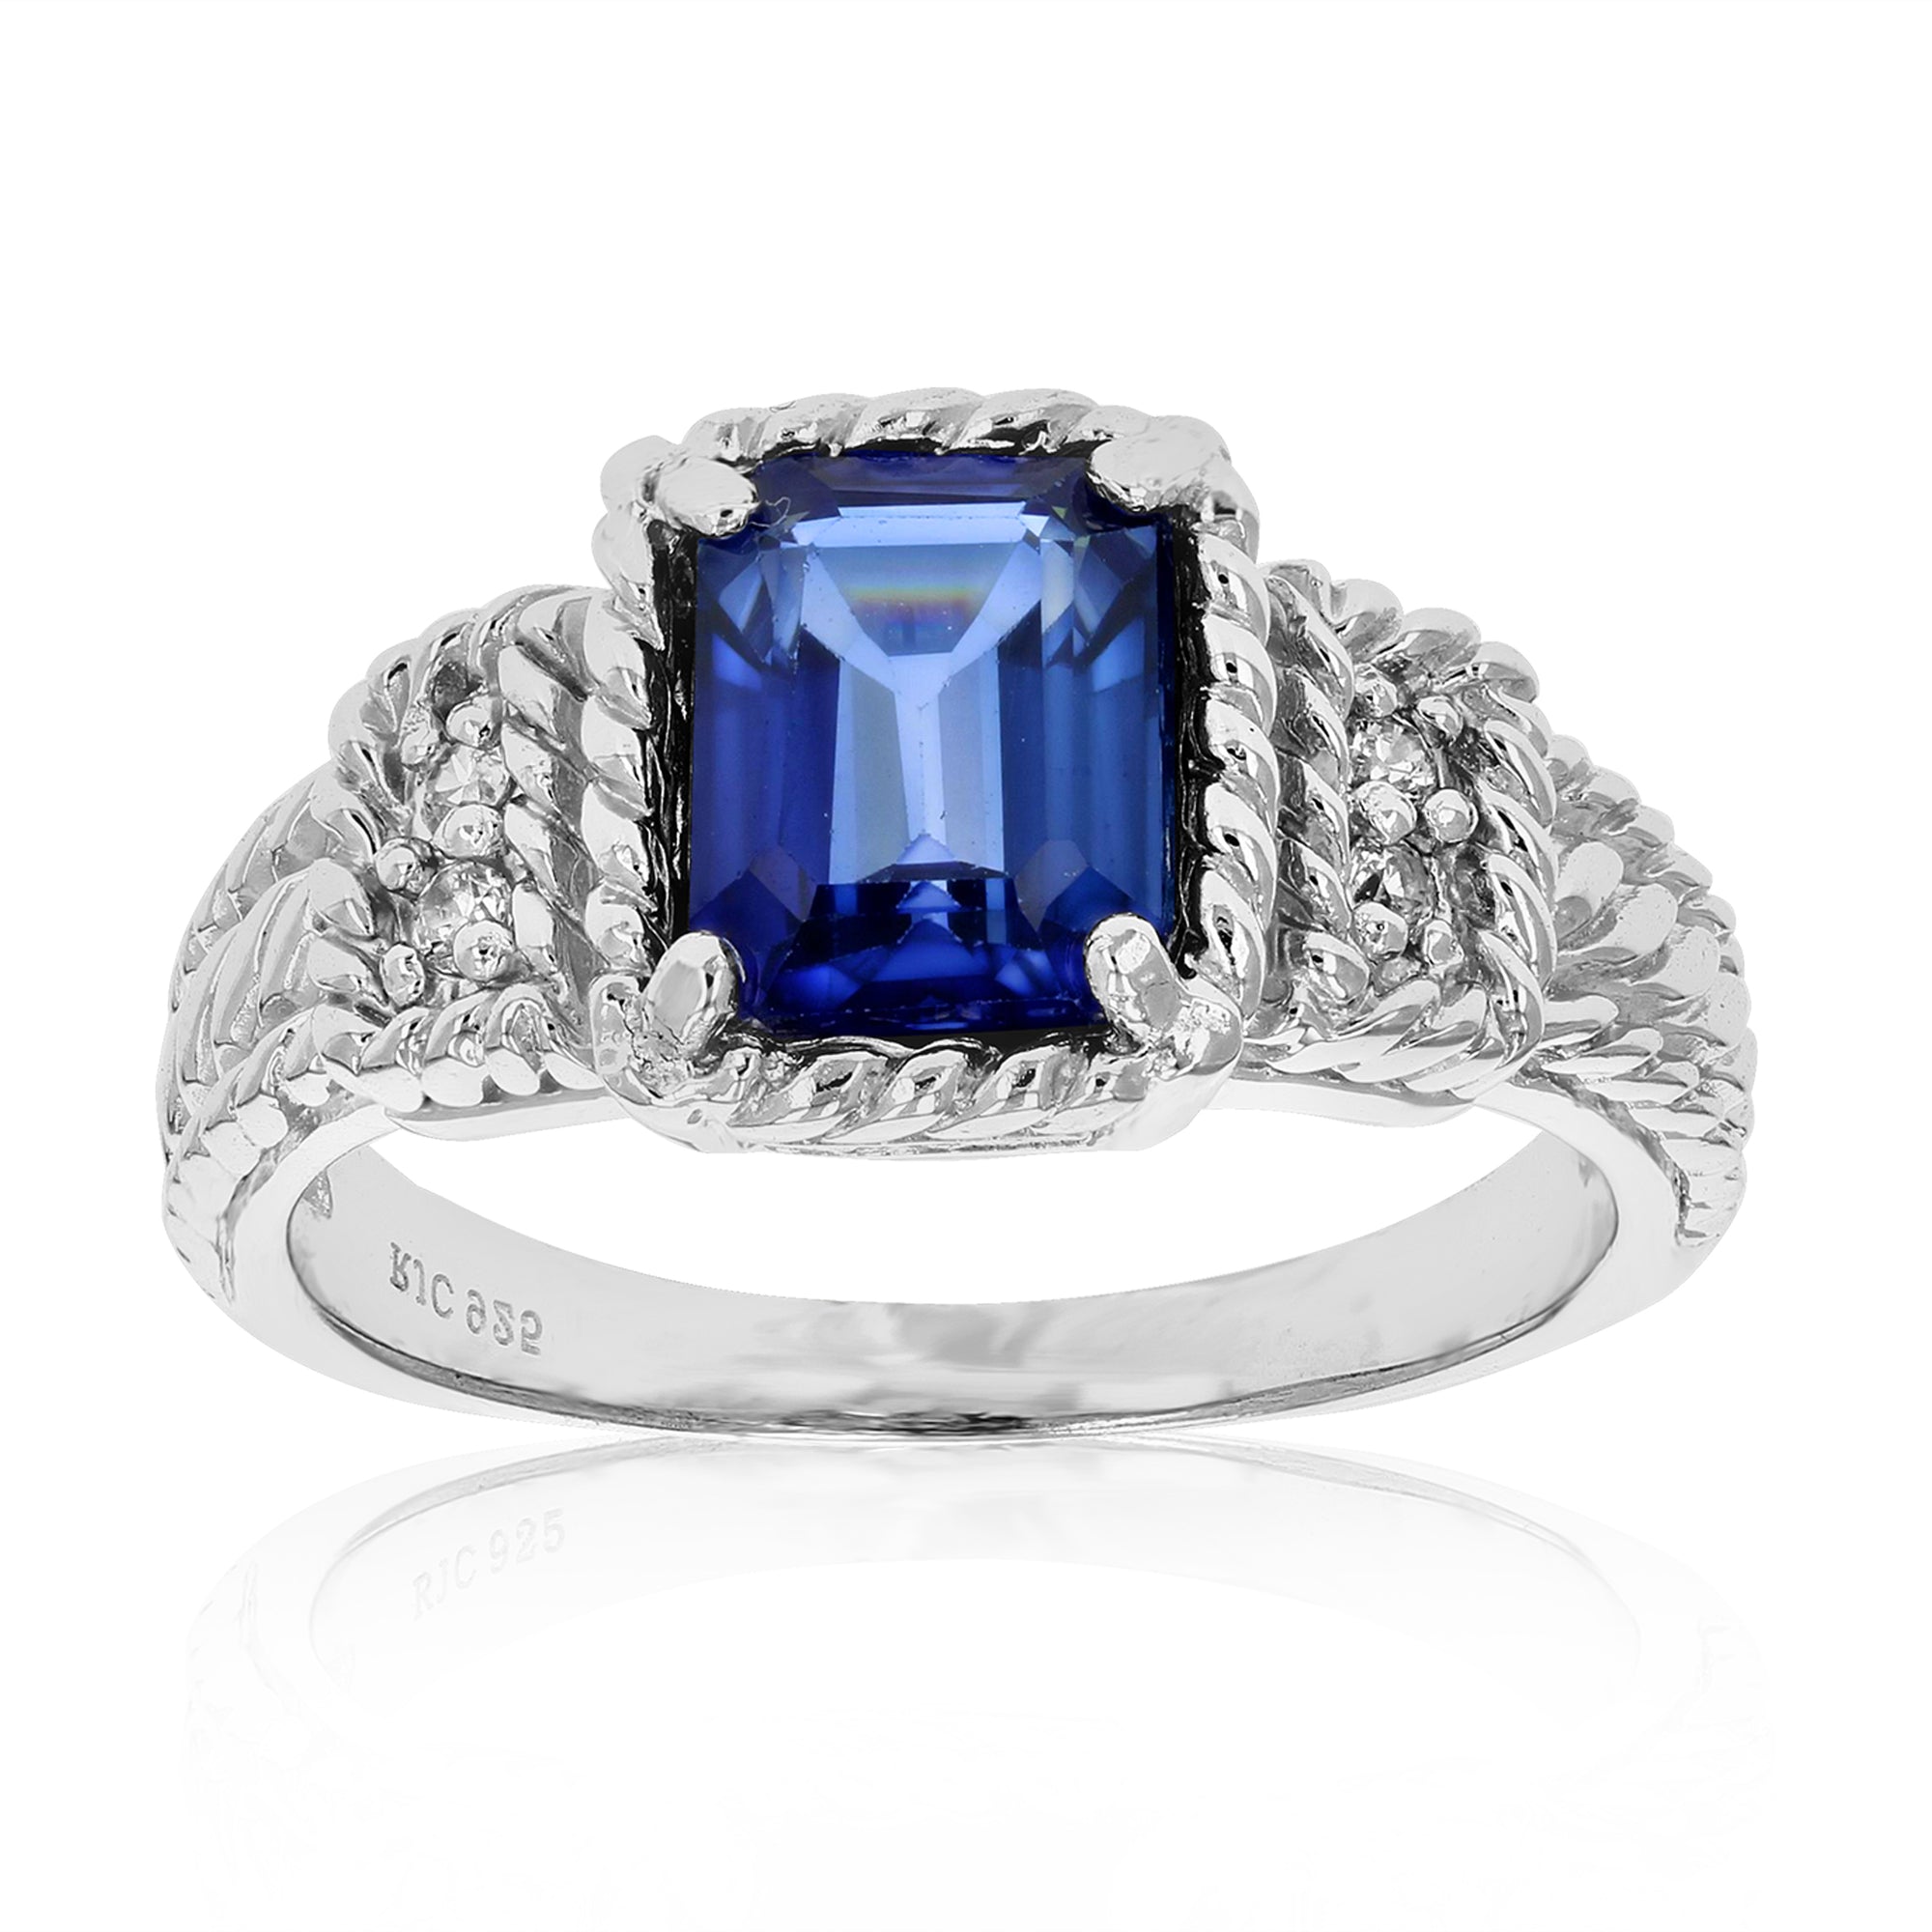 1 cttw Created Blue Sapphire Ring Emerald Cut .925 Sterling Silver Ring Size 7